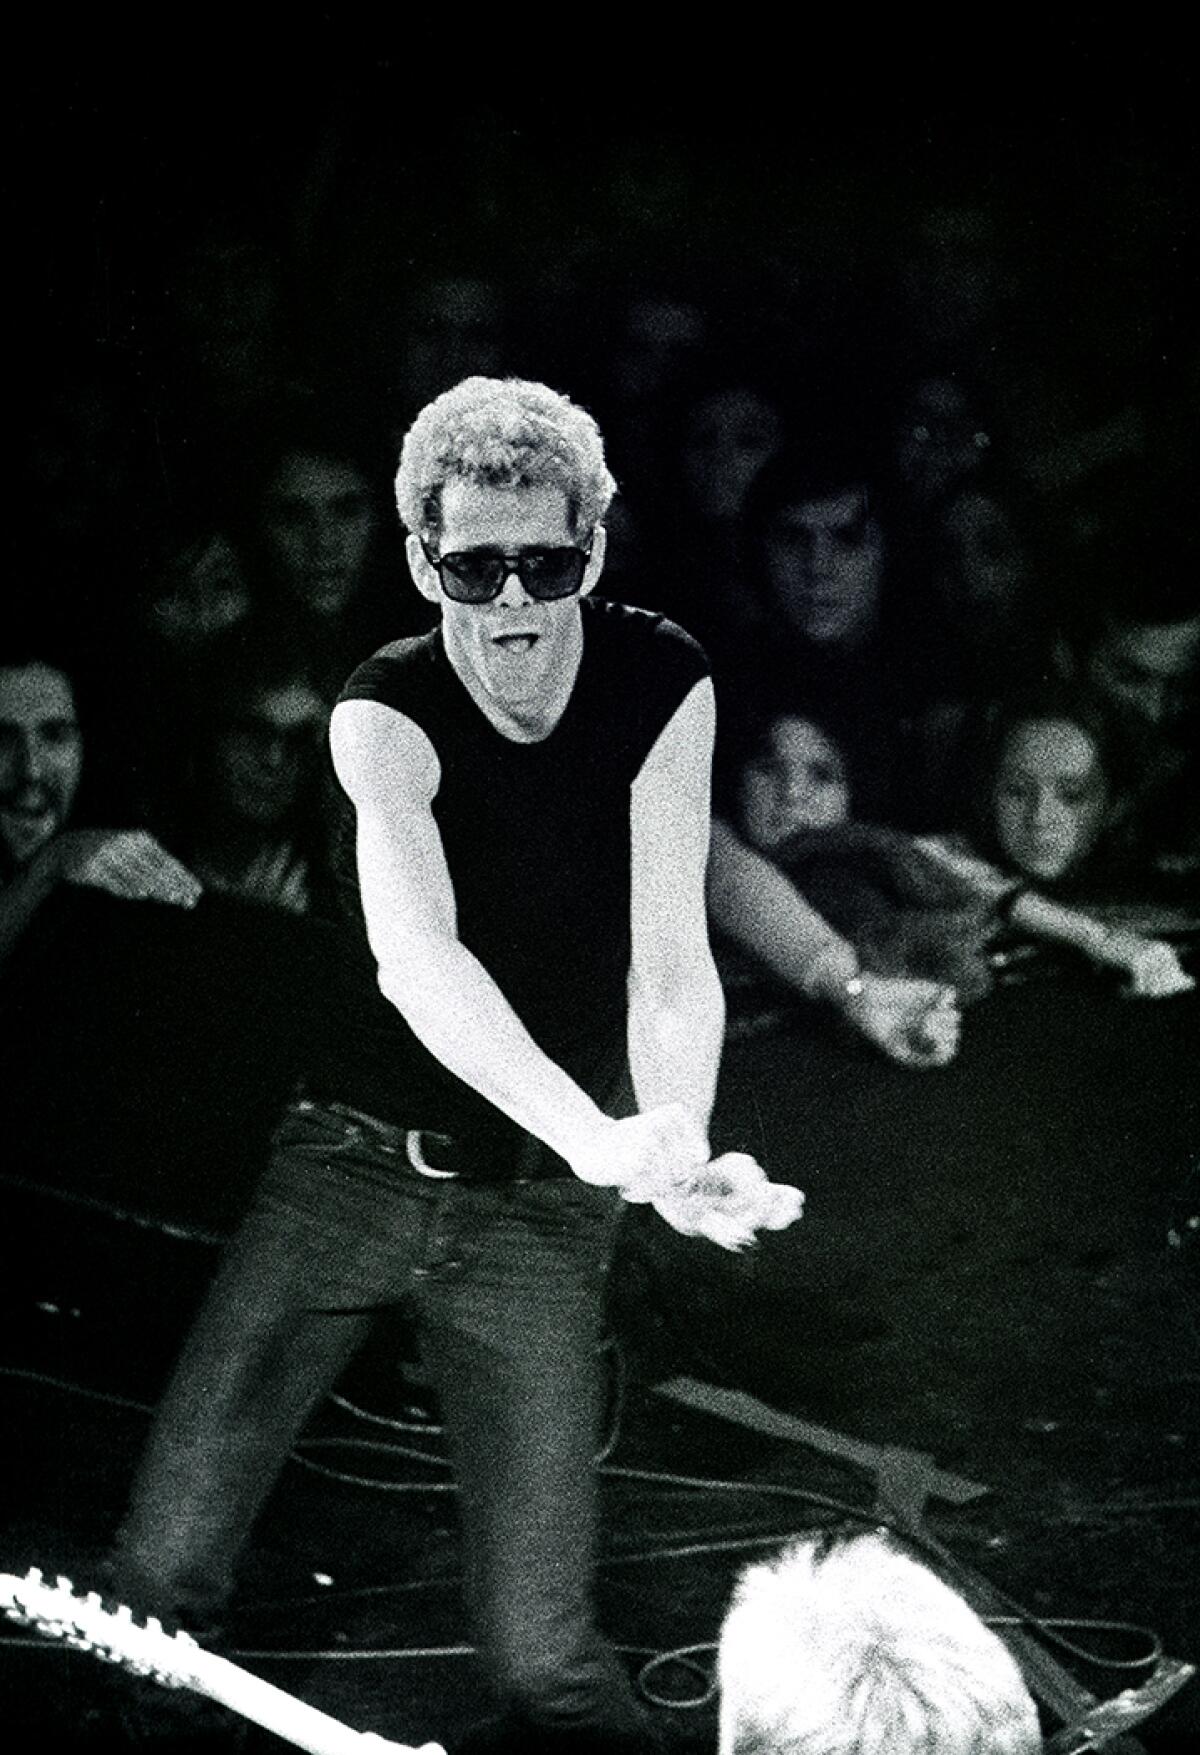 Lou Reed in concert at the Winterland Ballroom, San Francisco, 1974.